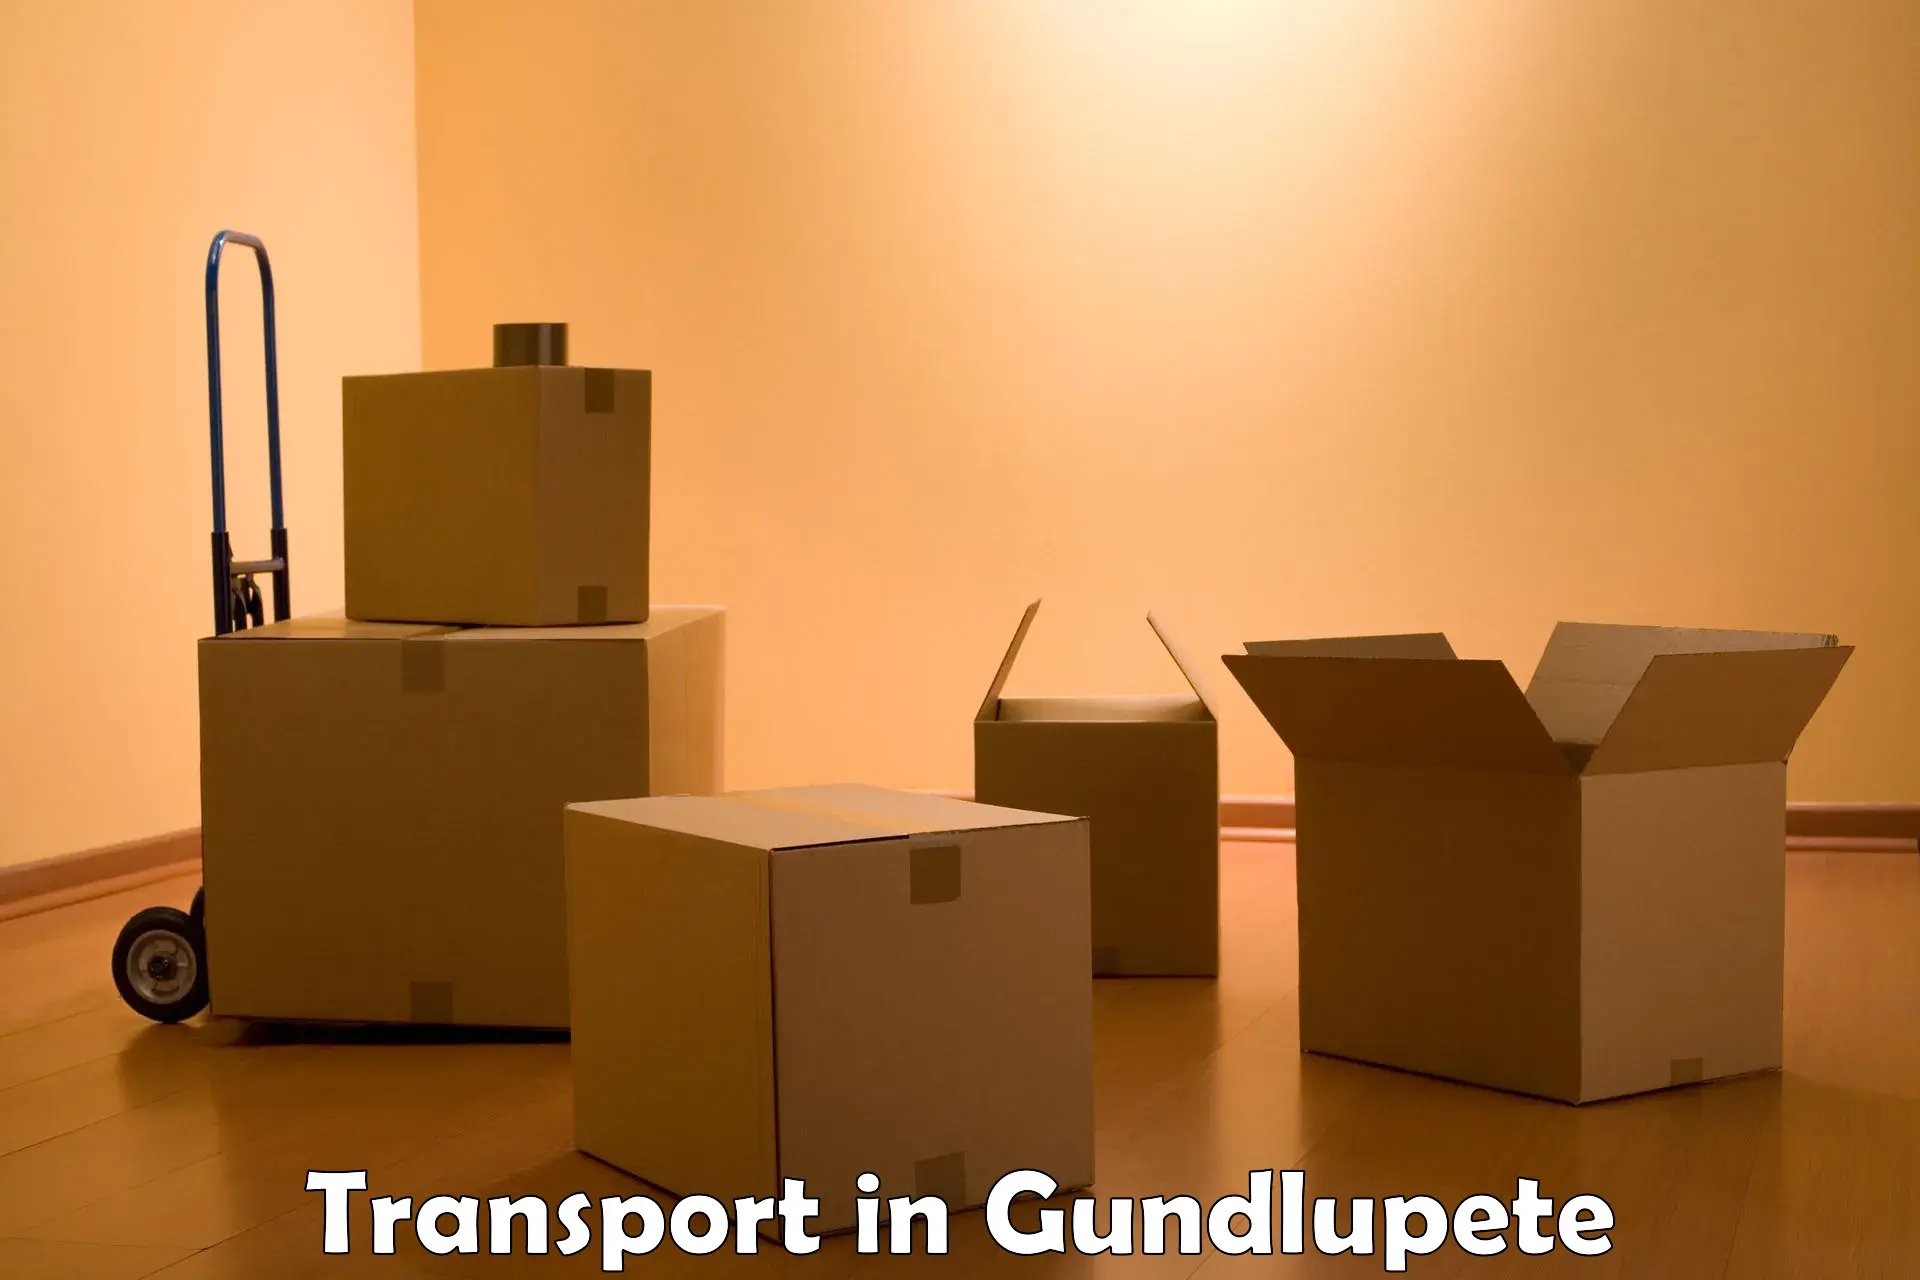 Luggage transport services in Gundlupete